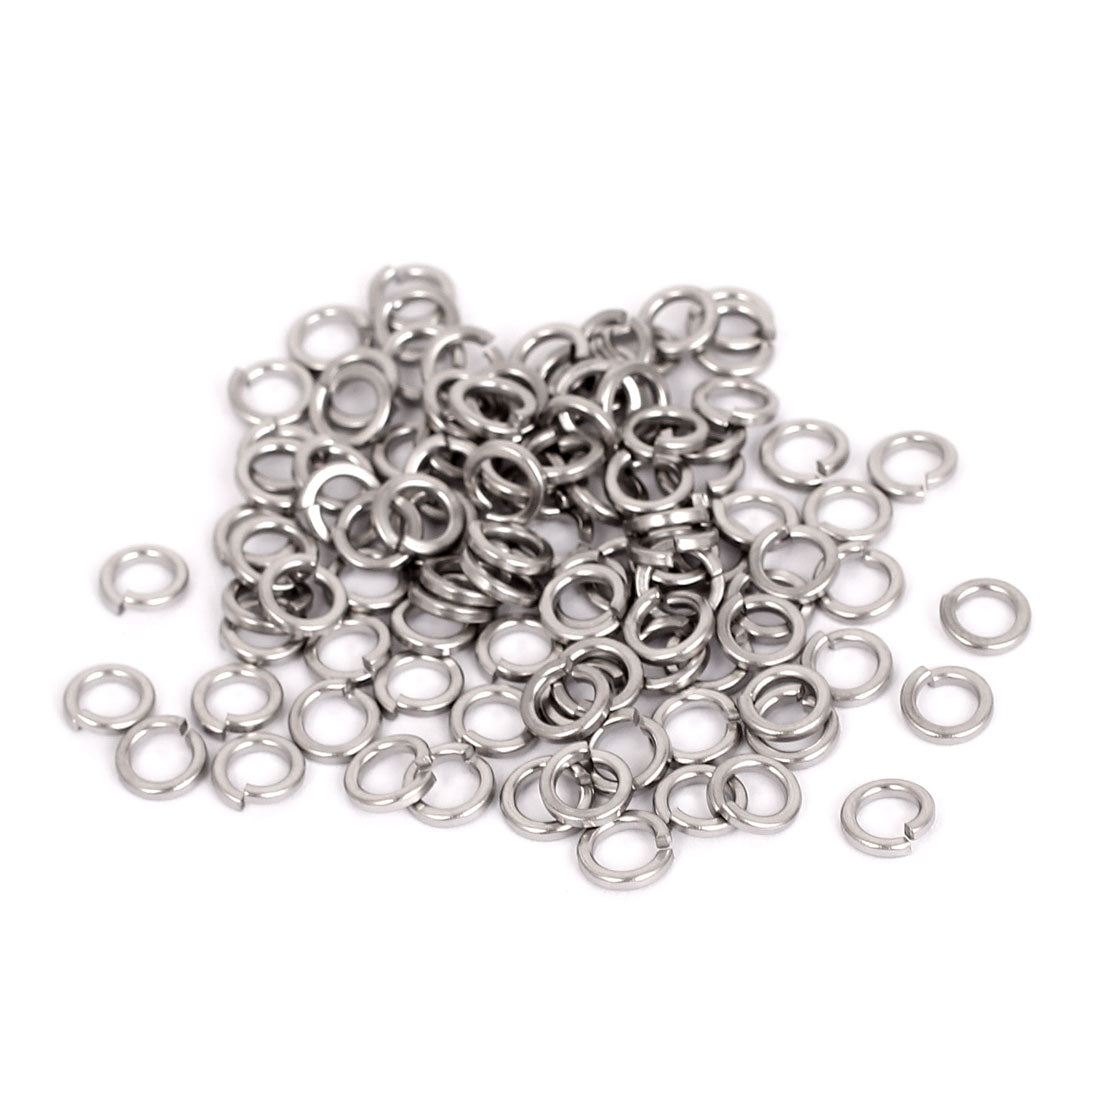 uxcell Uxcell 100pcs 304 Stainless Steel Split Lock Spring Washers M4 Screw Gasket Pad